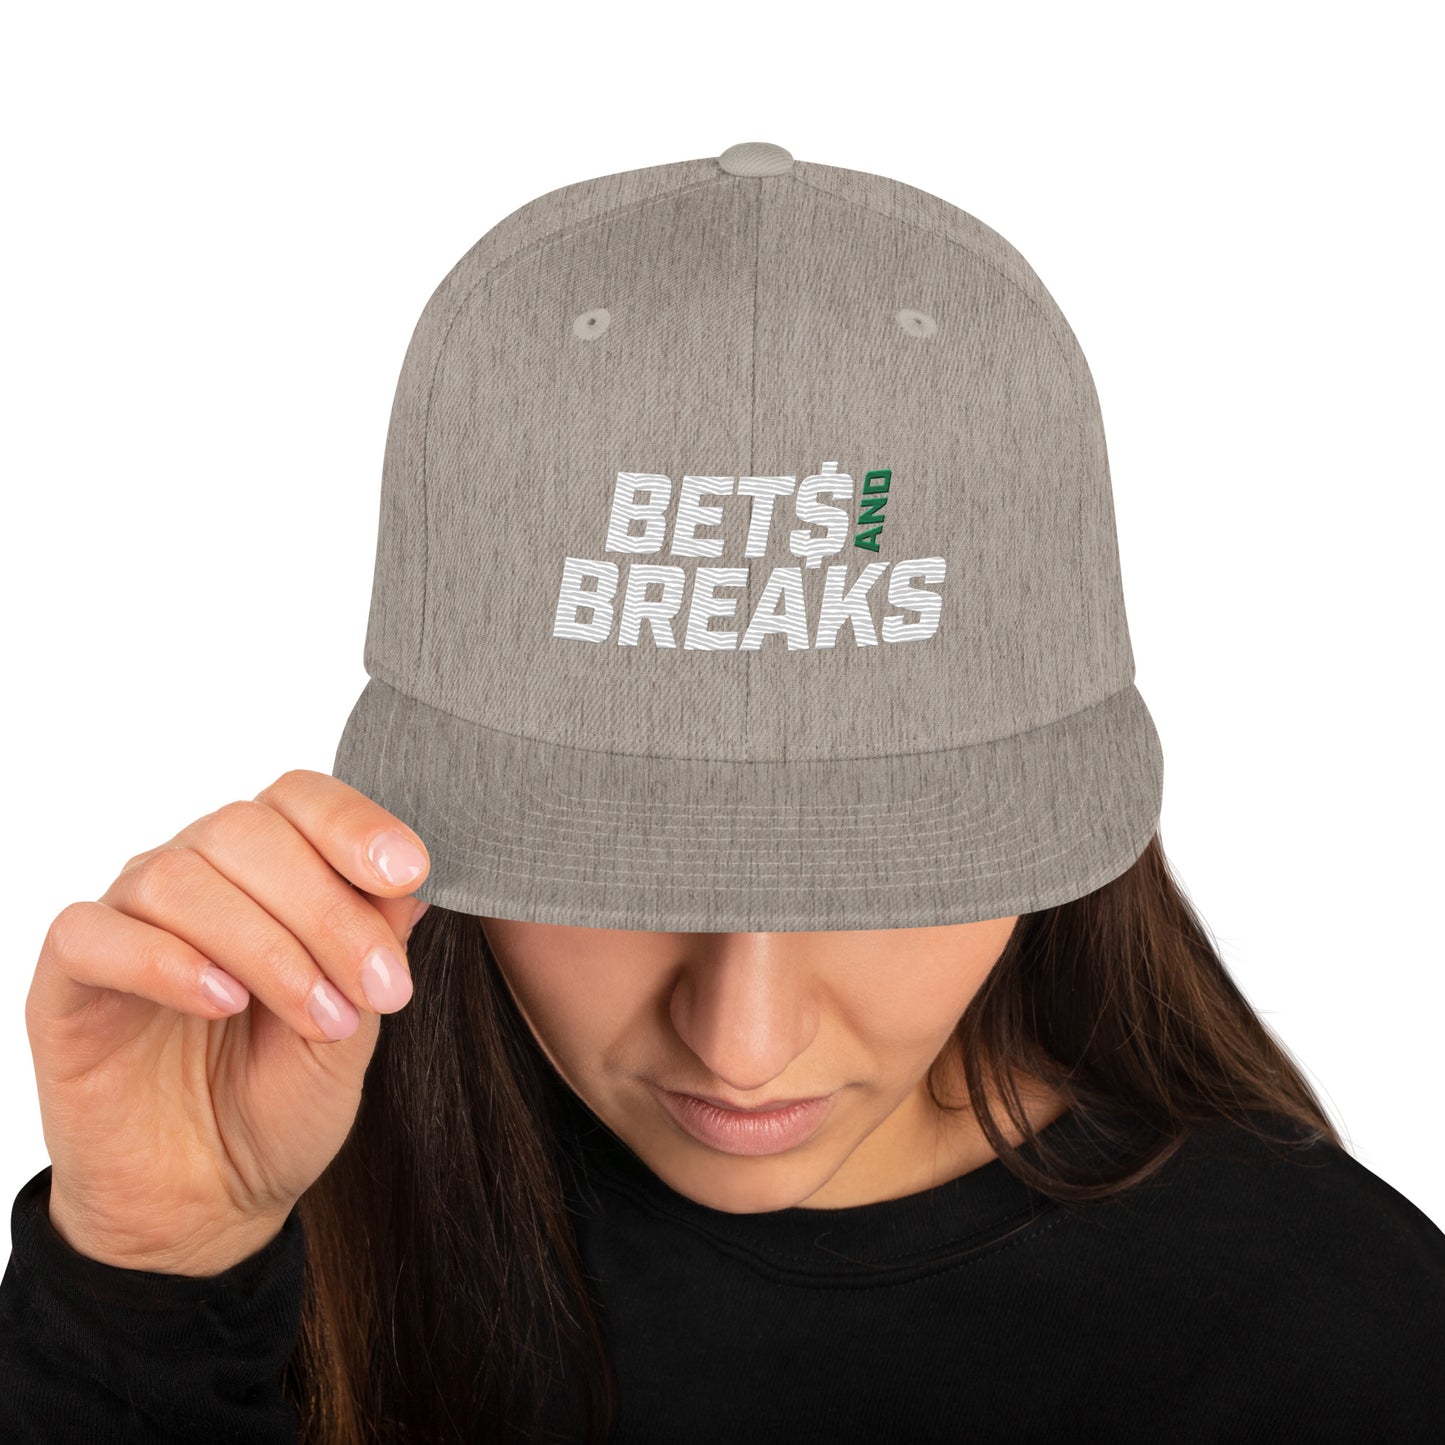 Bets and Breaks Snapback Hat